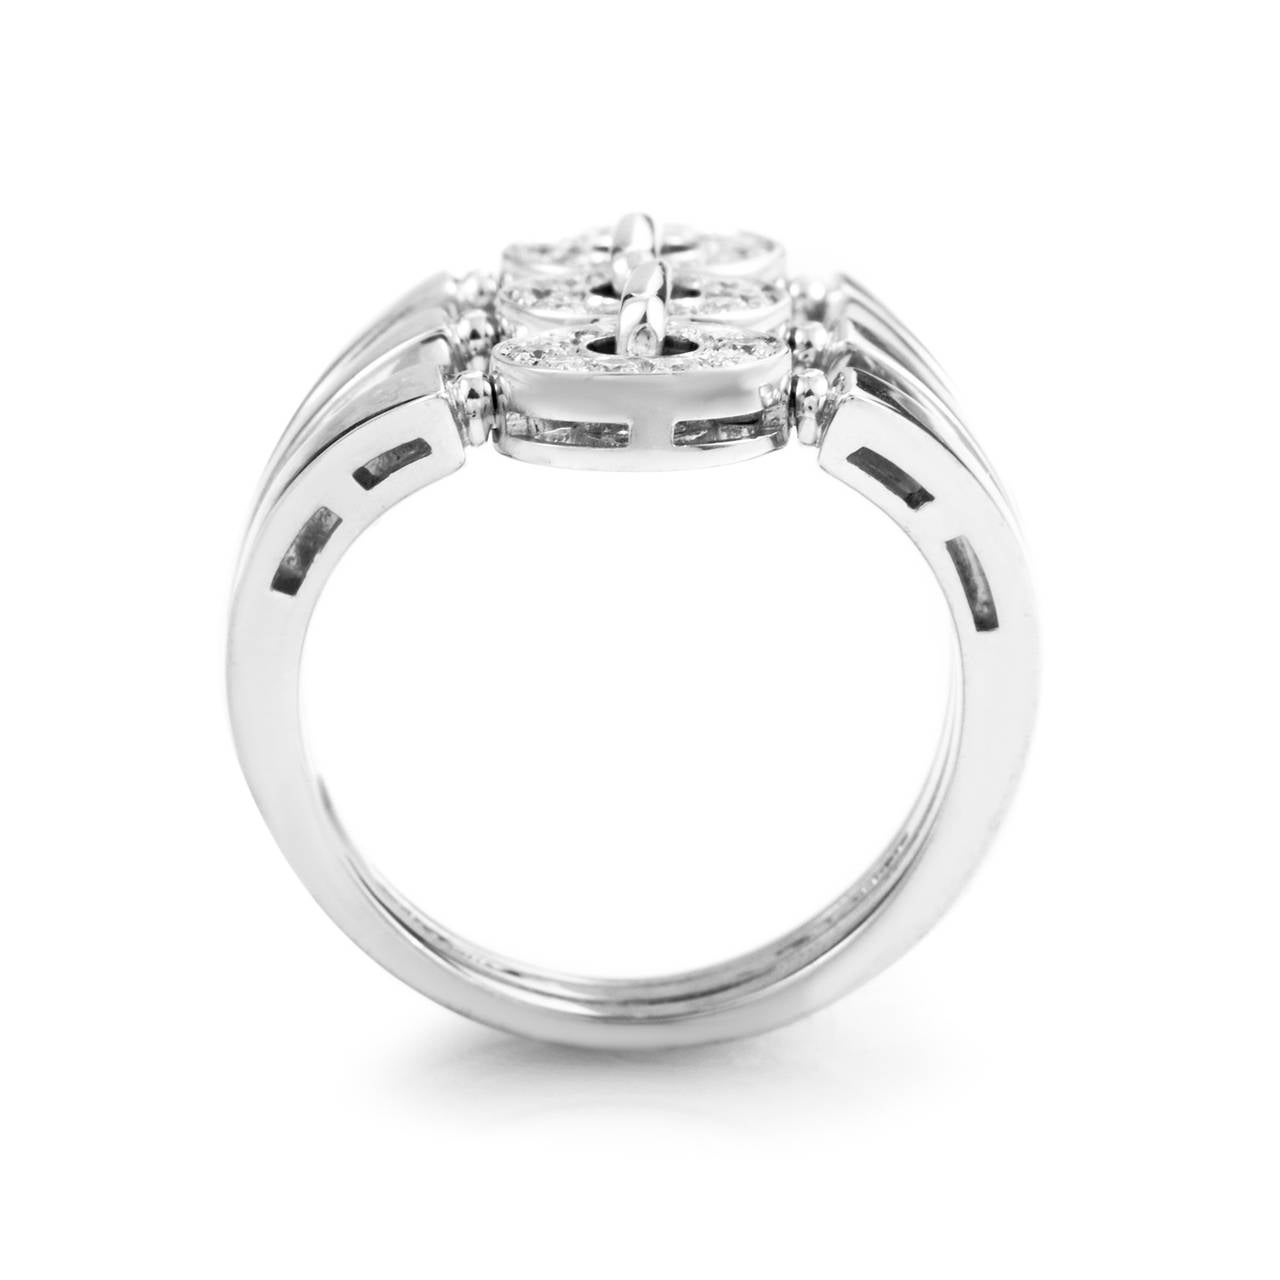 The unique design of this ring from Bvlgari is sure to garner much attention. The ring is comprised of three 18K white gold bands forged together and accented with .60 carats of diamonds.
Included Items: Manufacturer's Box
Ring Size: 6.0 (51 1/2)